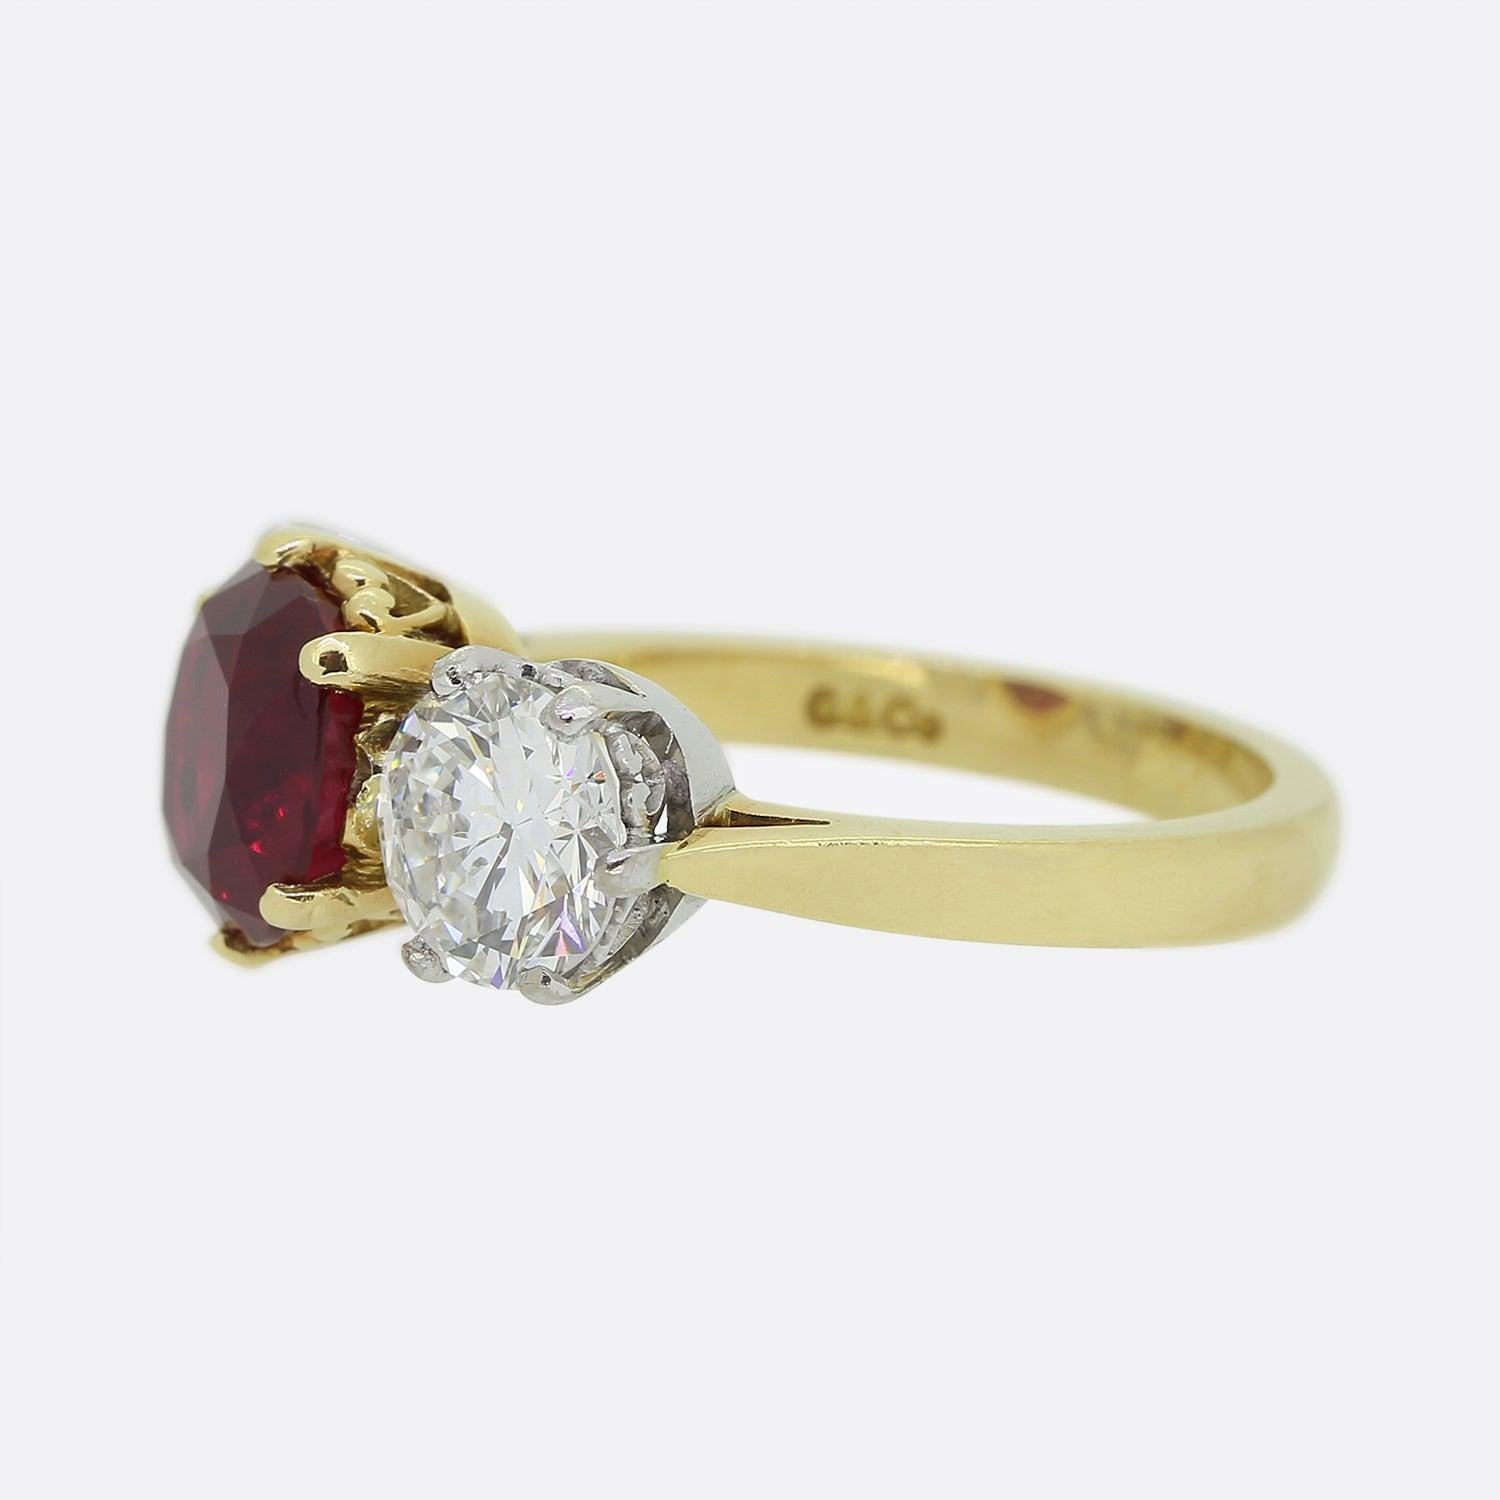 Here we have a truly breath taking ruby and diamond three-stone ring. The focal point of this piece being the 3.08ct antique cushion cut Burmese ruby which sits proud in a six clawed setting at the centre of the face. This principle stone has been